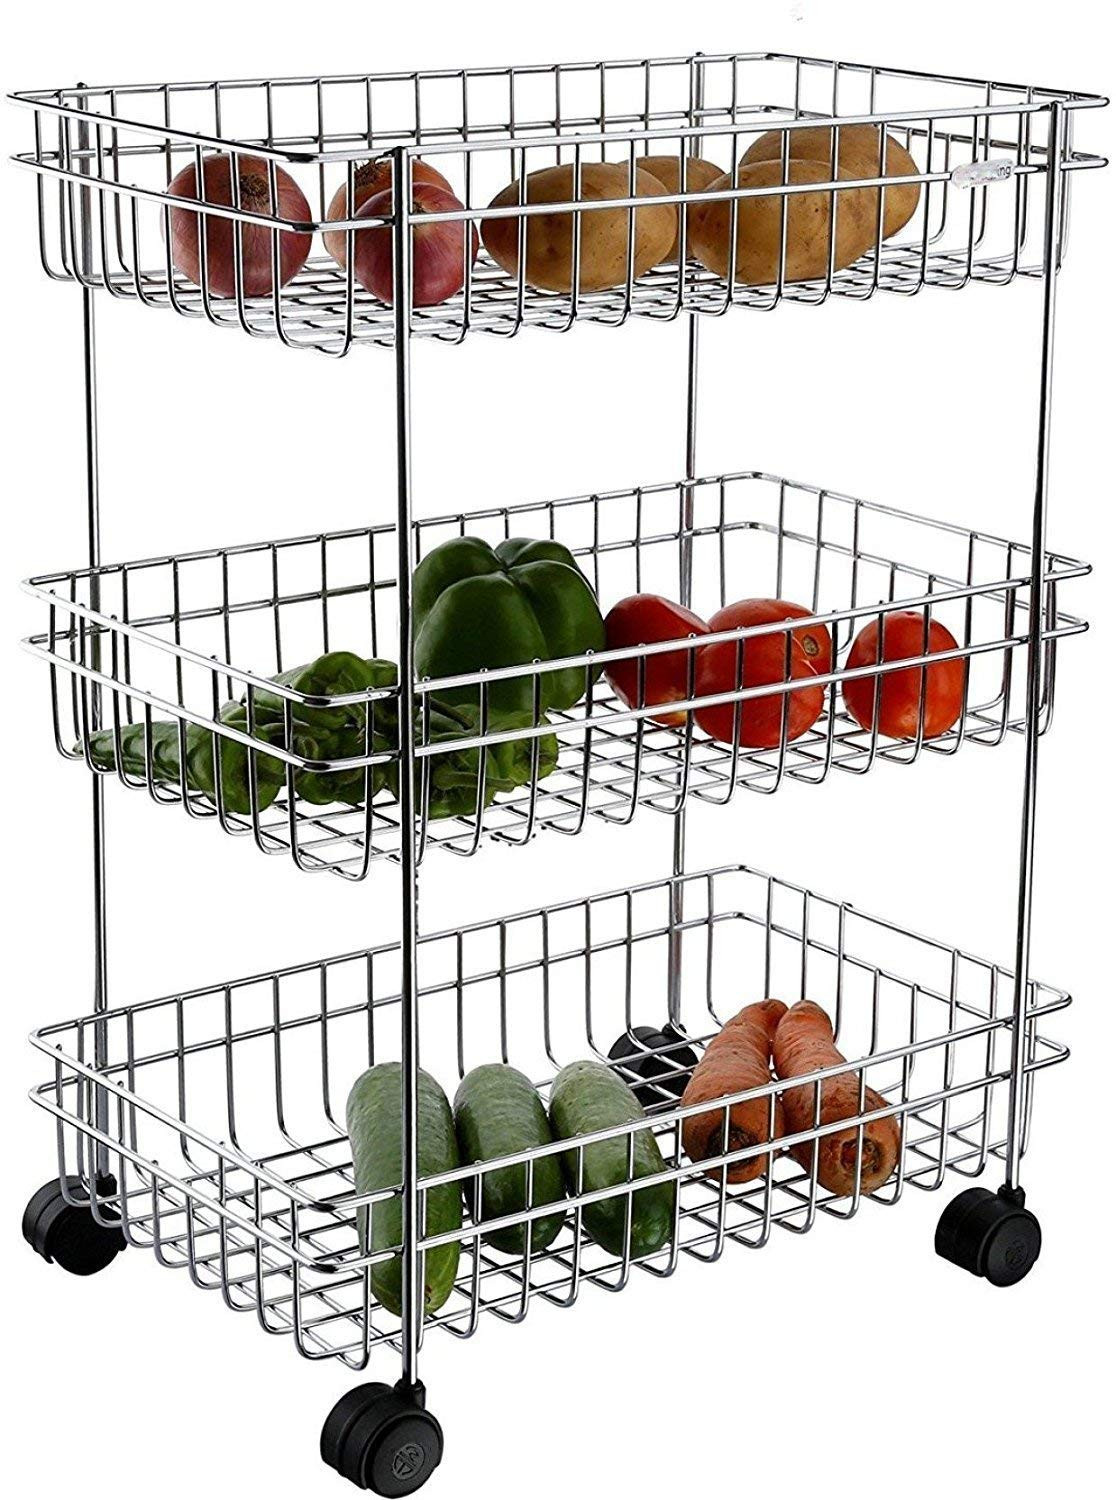 Kuber Industries Deluxe 3-Layer Stainless Steel Multipurpose Storage Rack/Shelf, Kitchen Rack With Wheels (Silver)